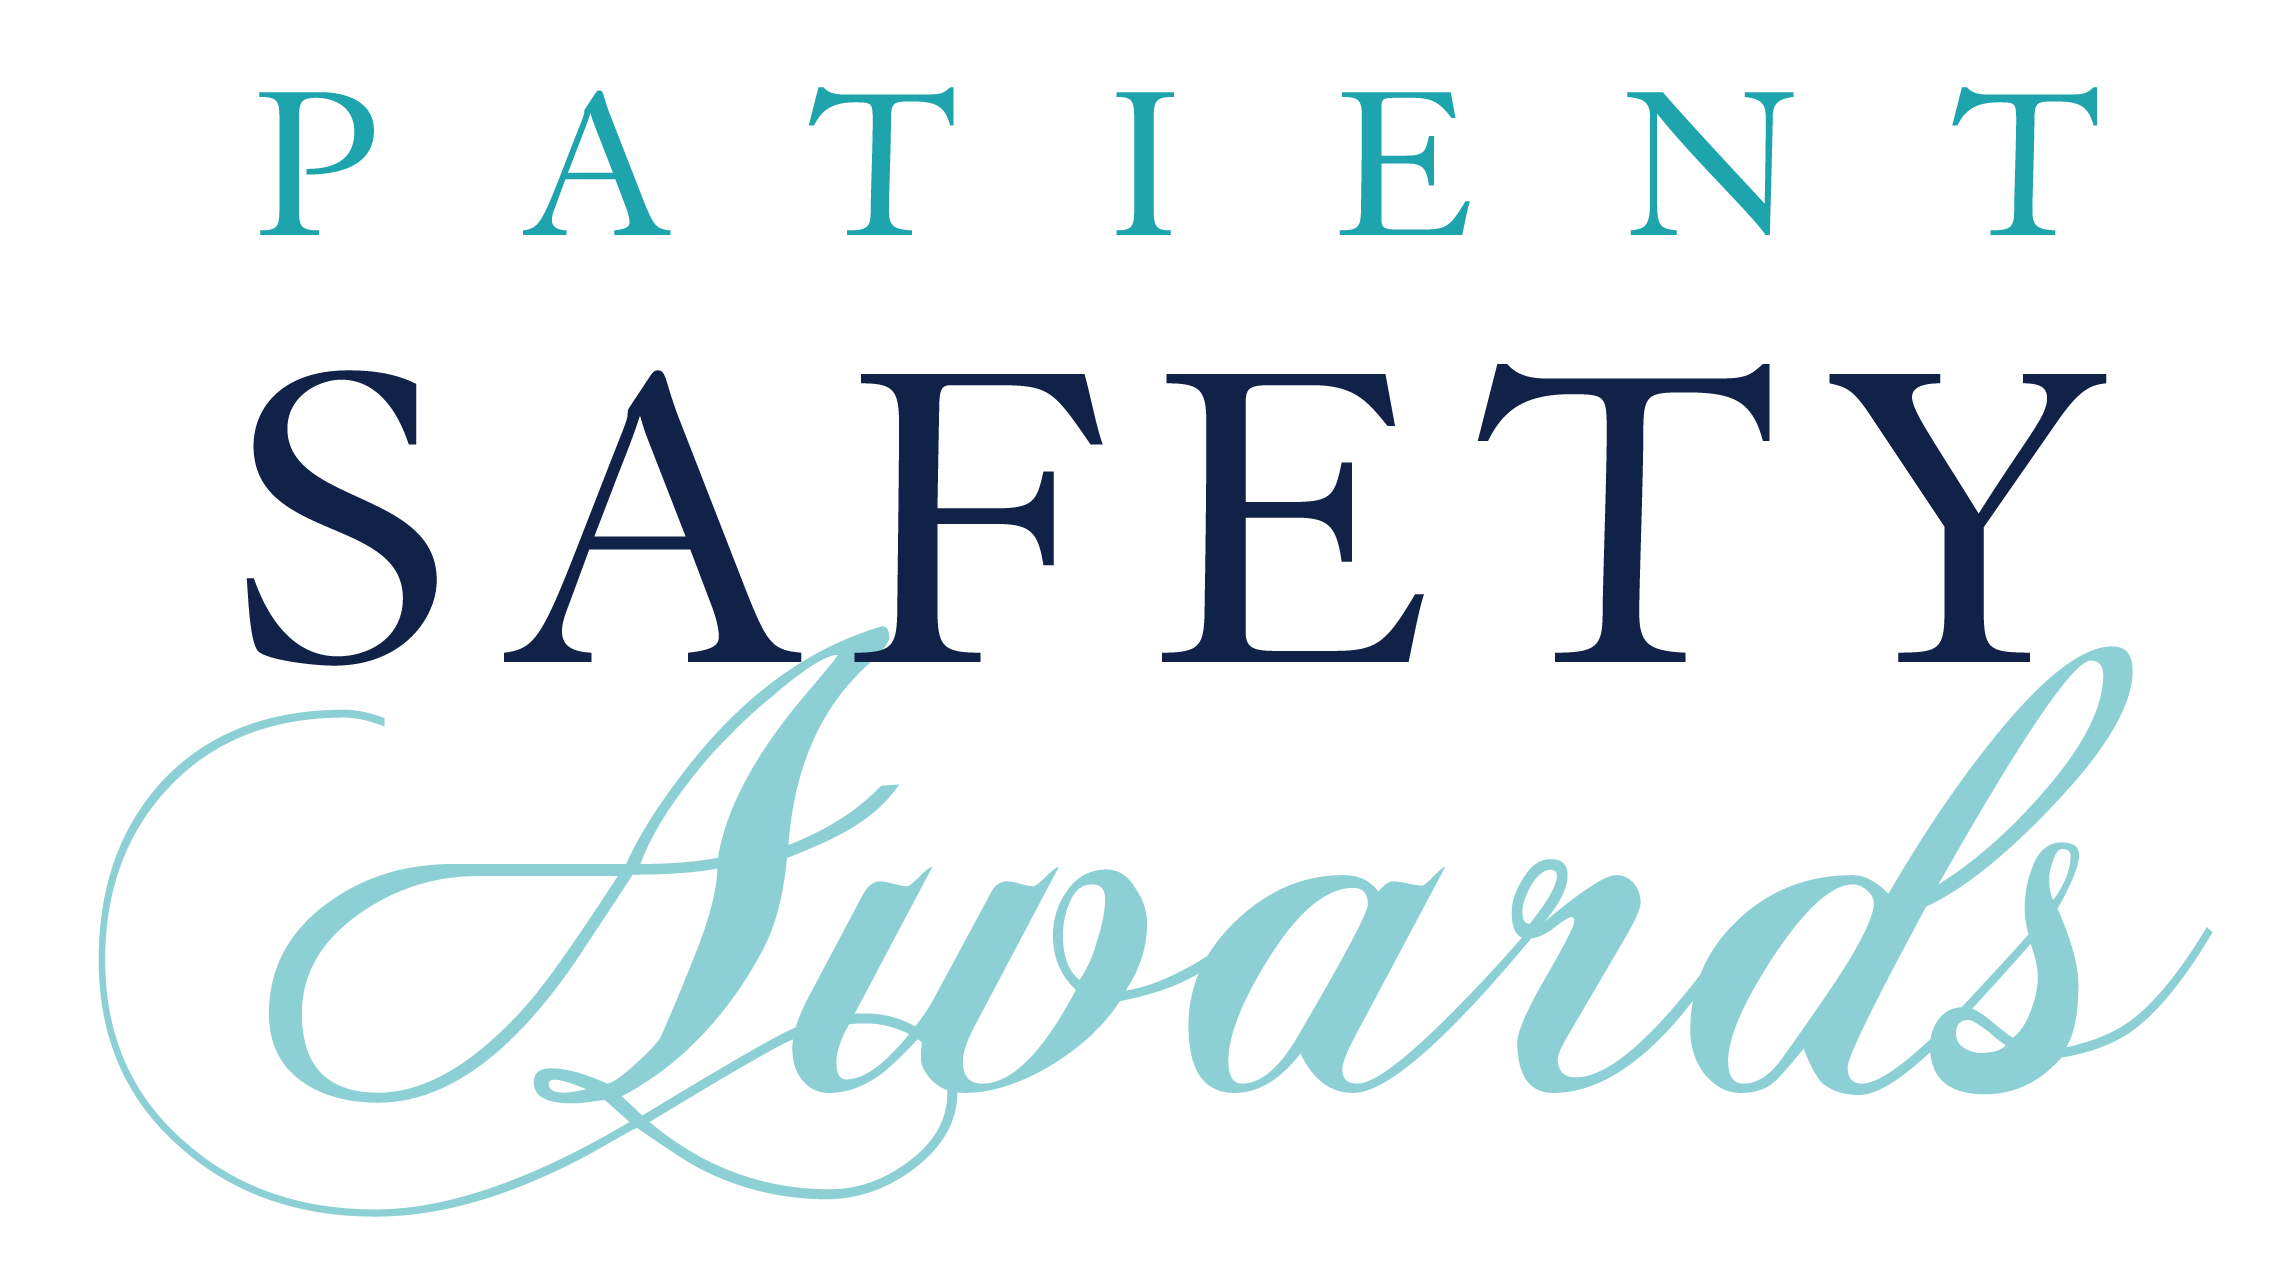 Patient Safety Awards logo